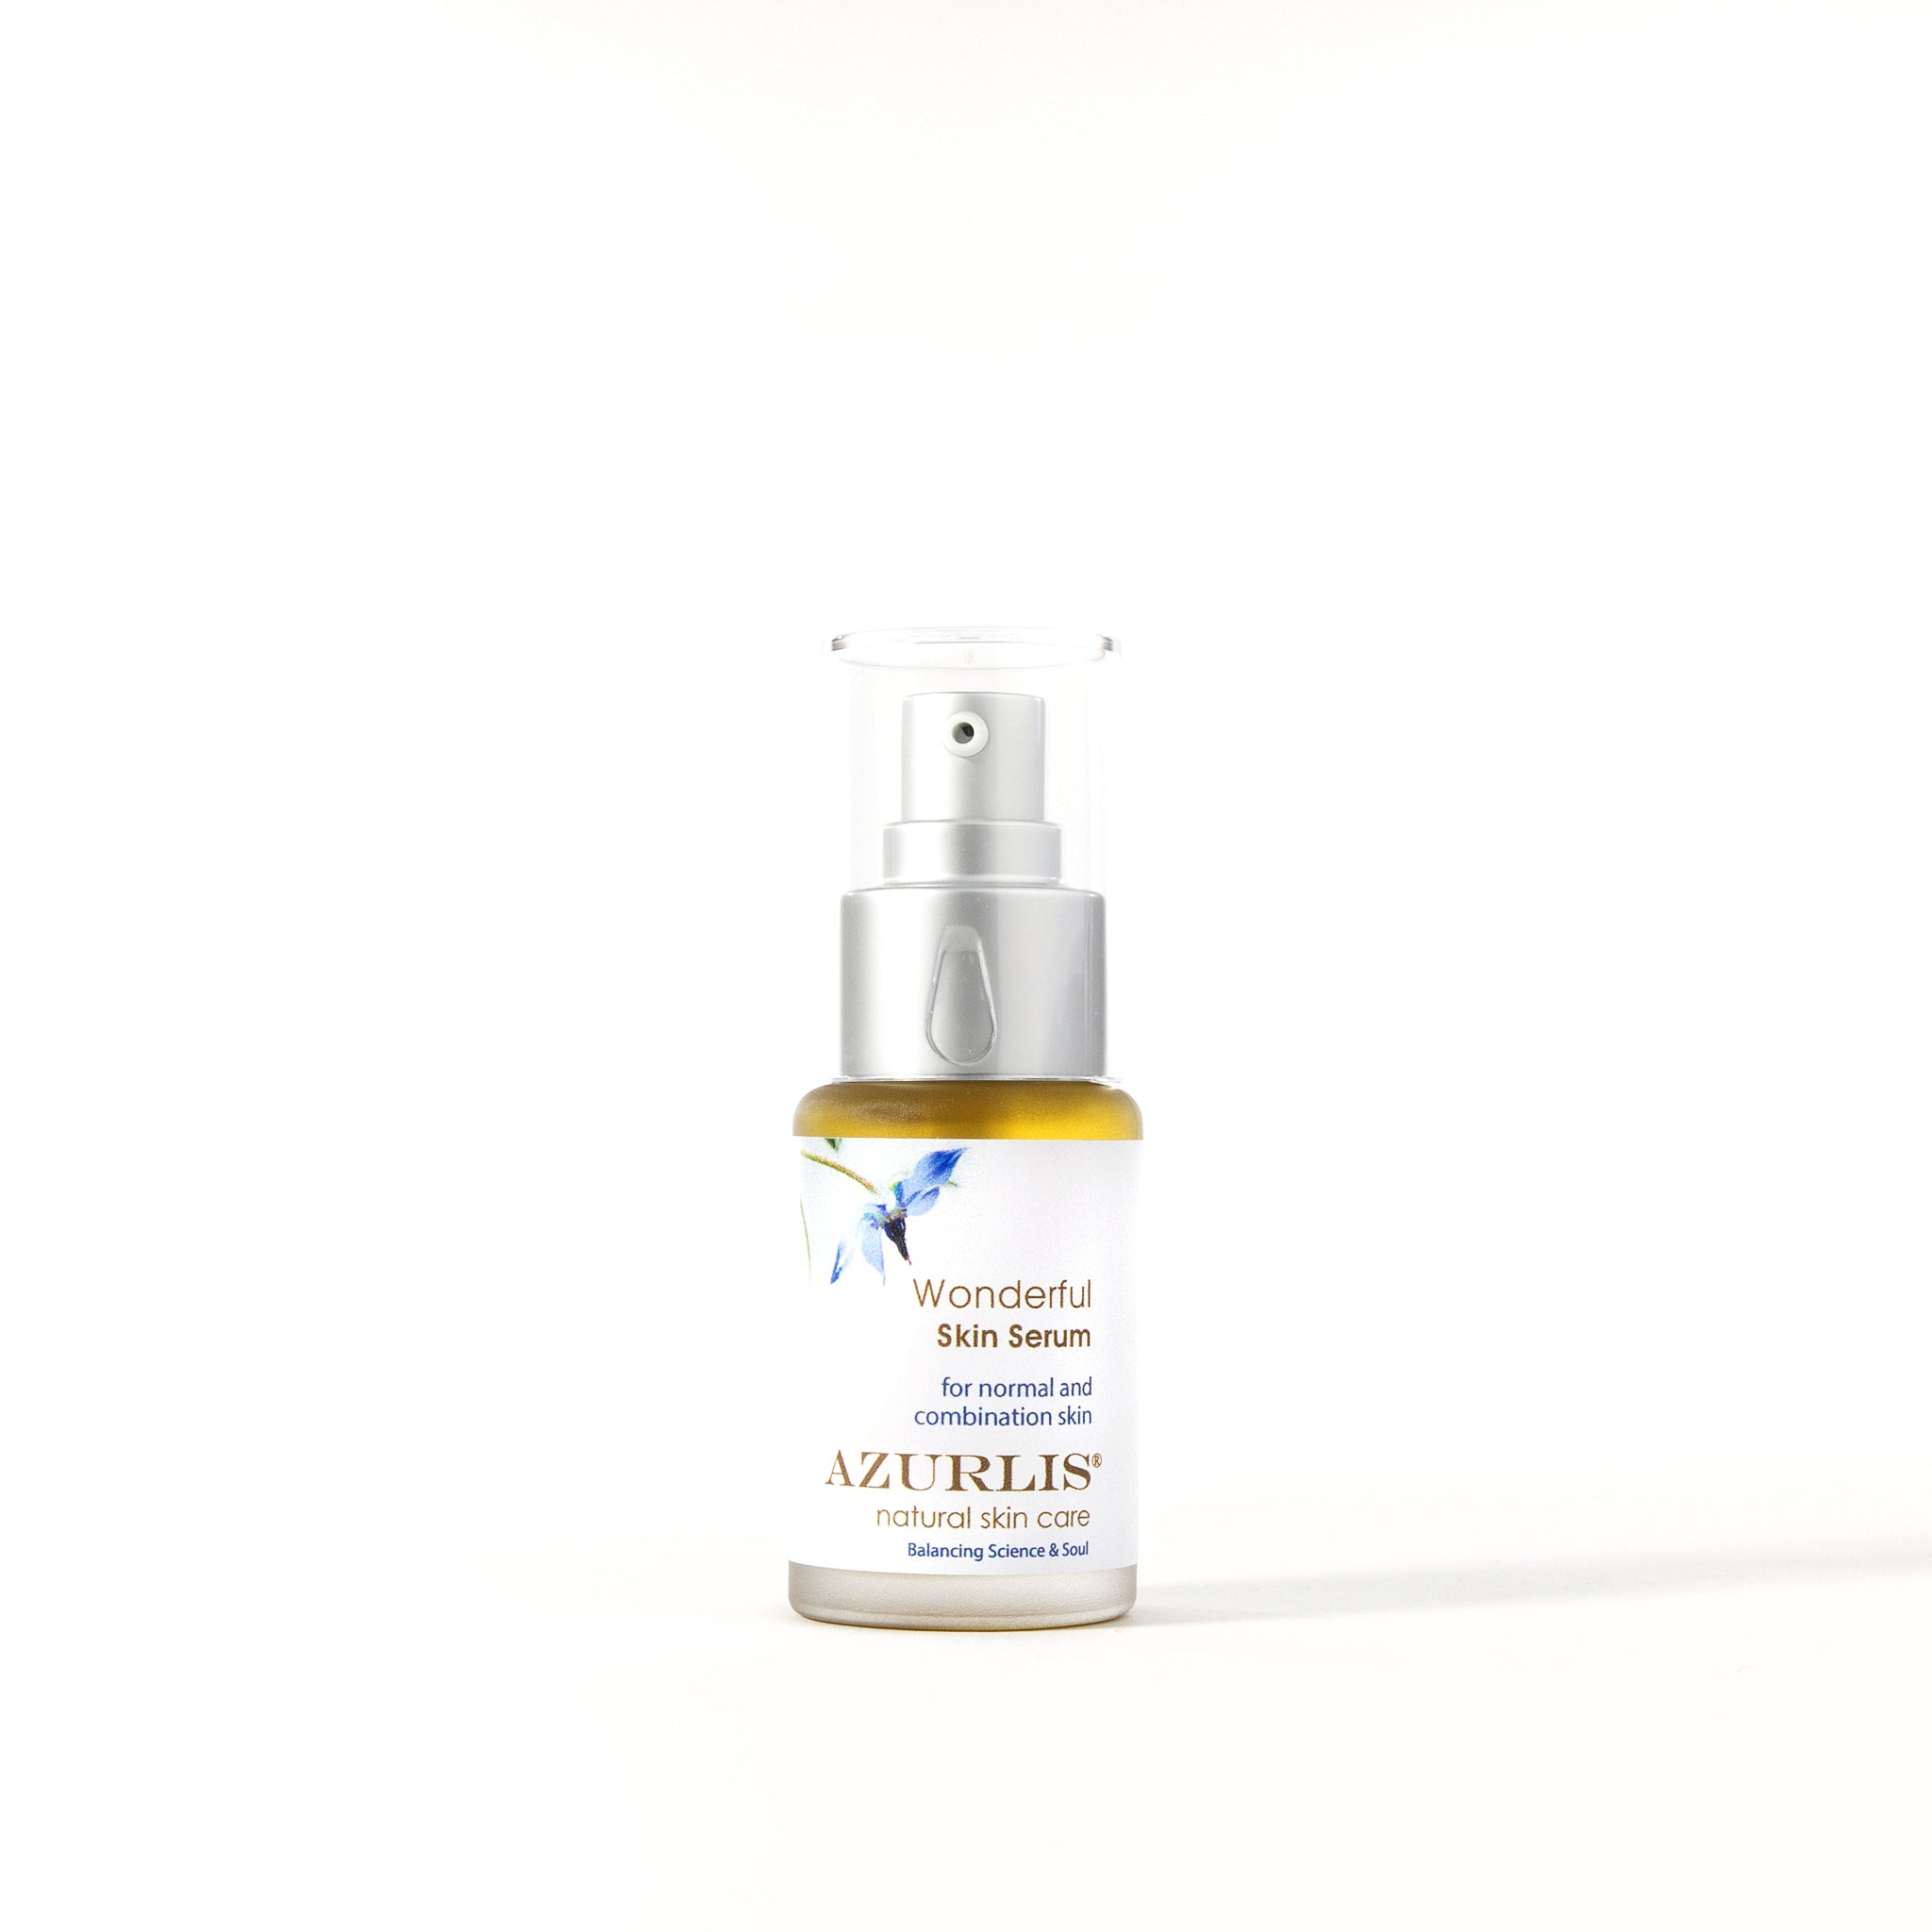 Azurlis™ Wonderful Skin Serum 30ml For normal &amp; combination skin.  A wonderful serum that can be used daily instead of your moisturiser. Feeds and protects the skin, while nurturing the germinal cellular layer.